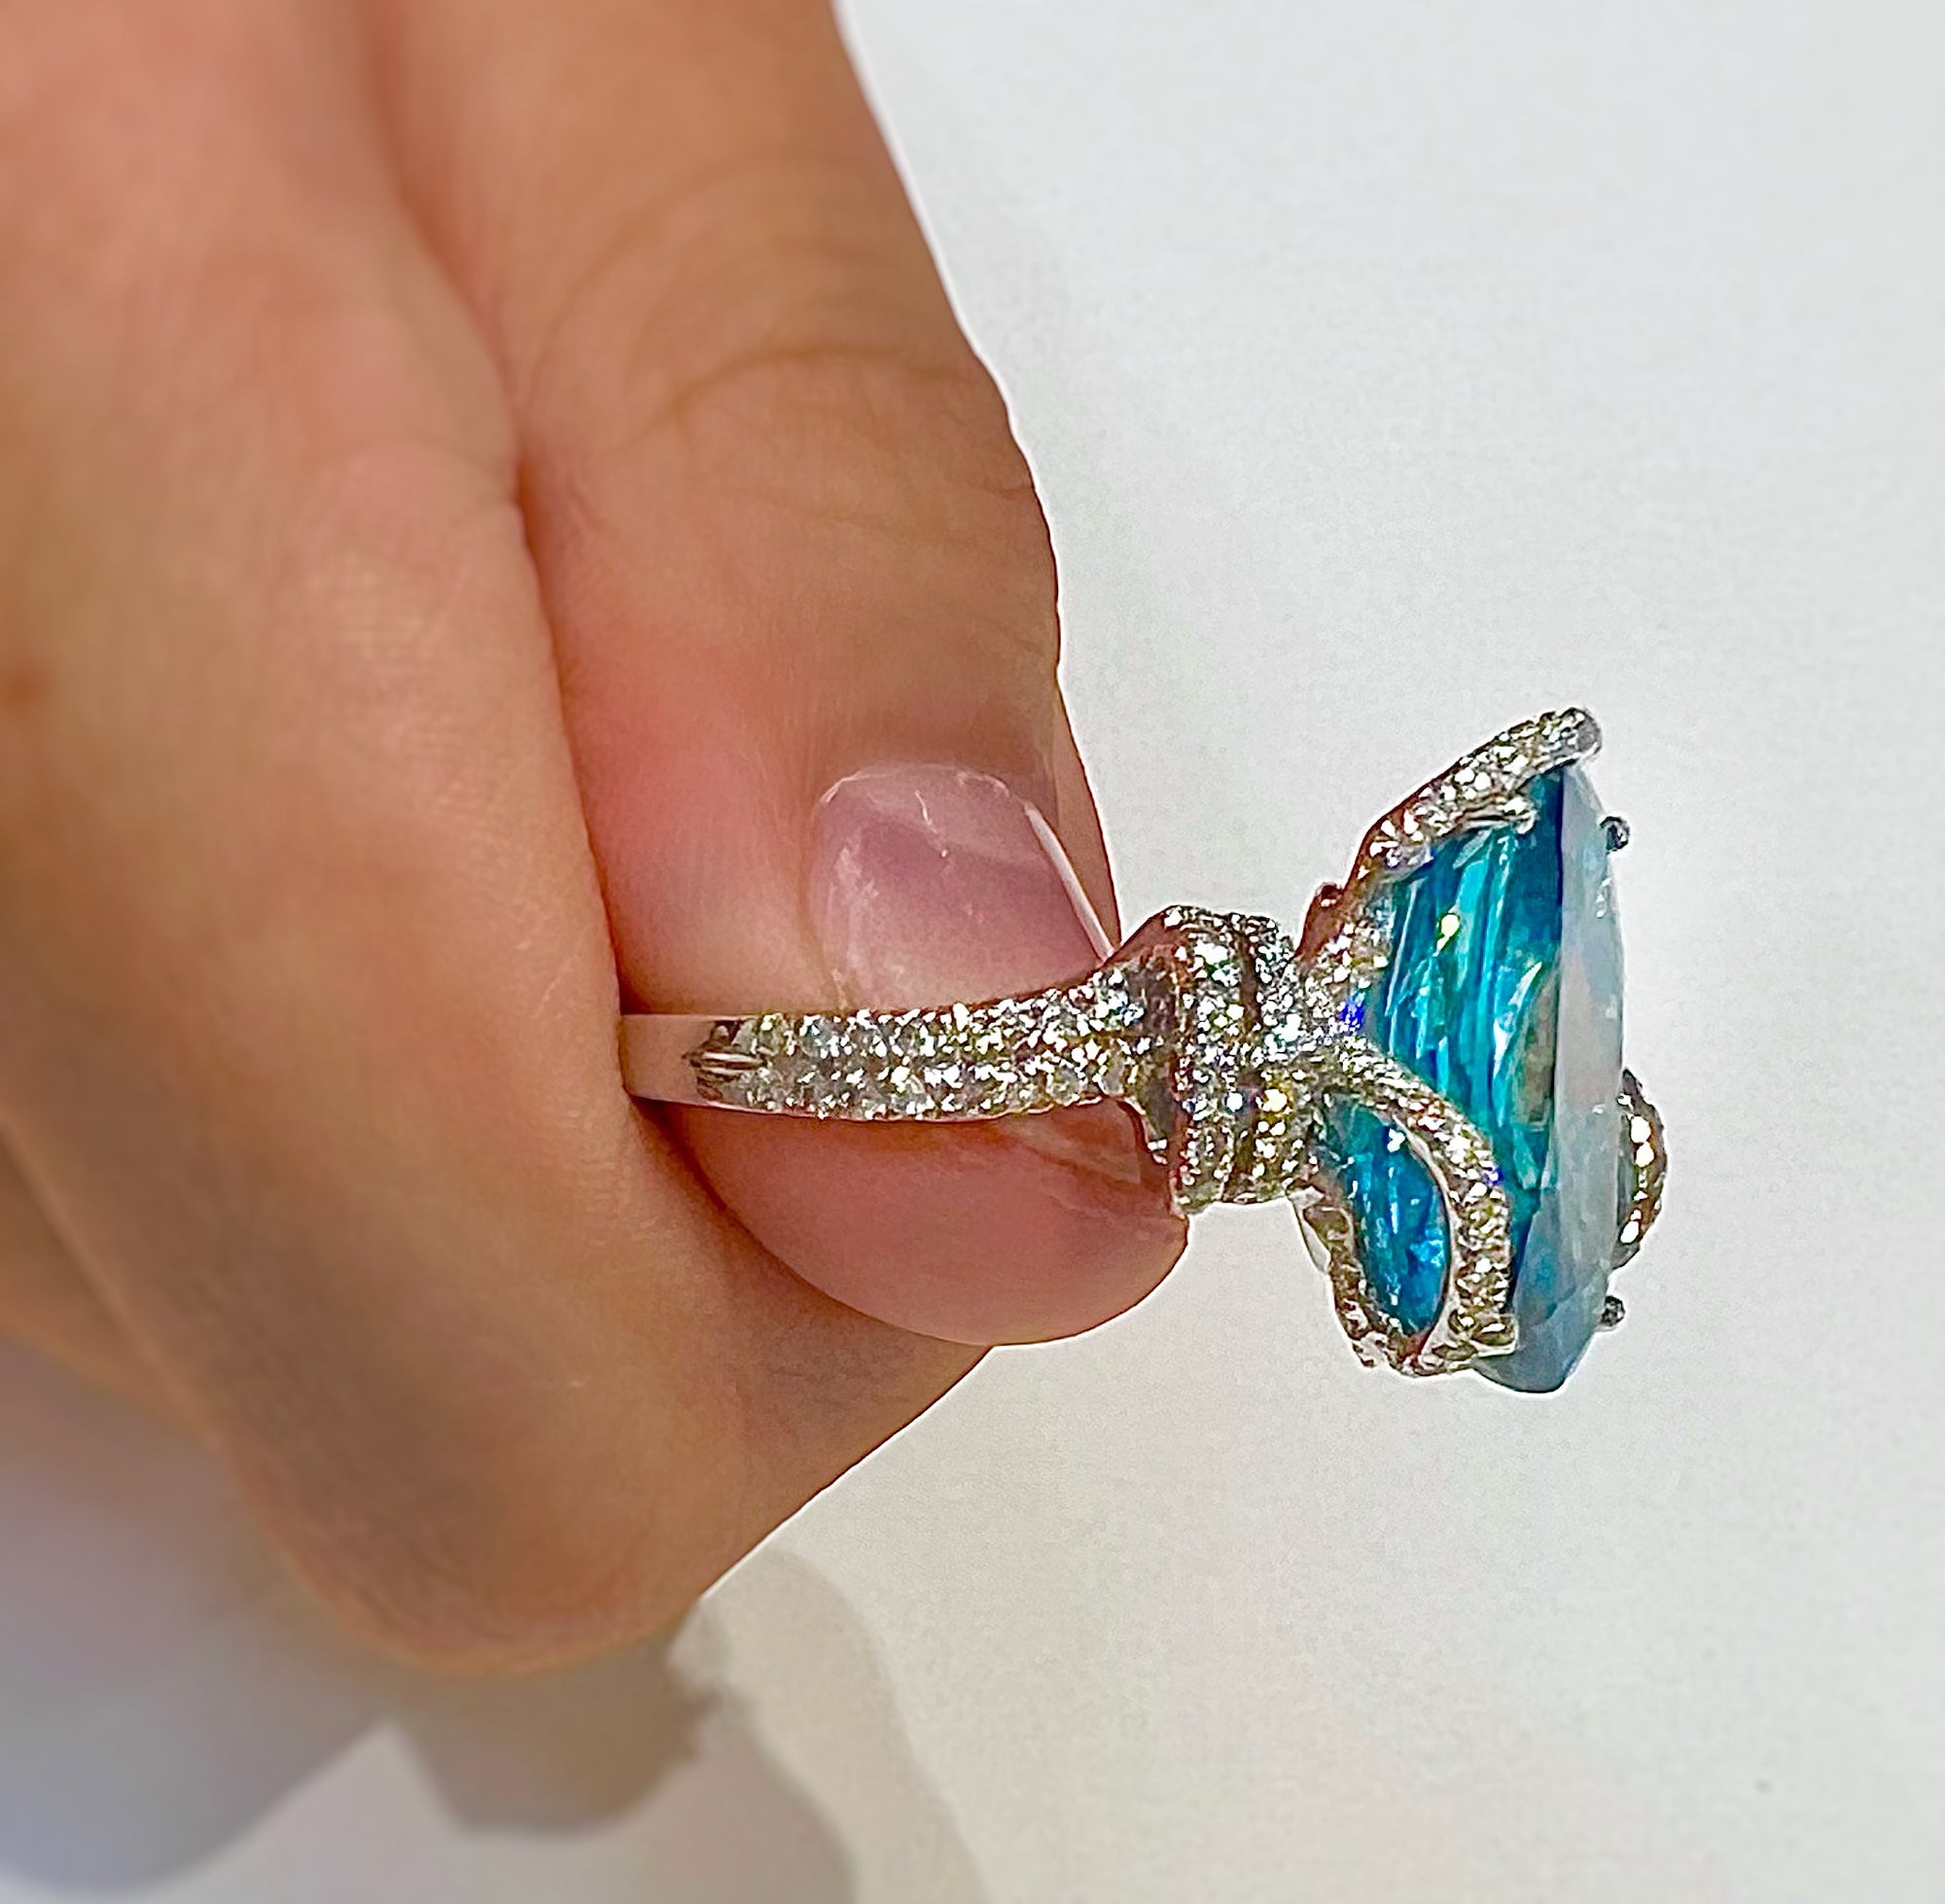 Blue Zircon & Diamond Ring by Yael available at Talisman Collection Fine Jewelers in El Dorado Hills, CA and online. This magnificent cocktail ring features an impressive 12.45 carat blue zircon surrounded by 0.85 carats of sparkling white diamonds set in 18k white gold. Both modern and classic, it's sure to be a future heirloom.